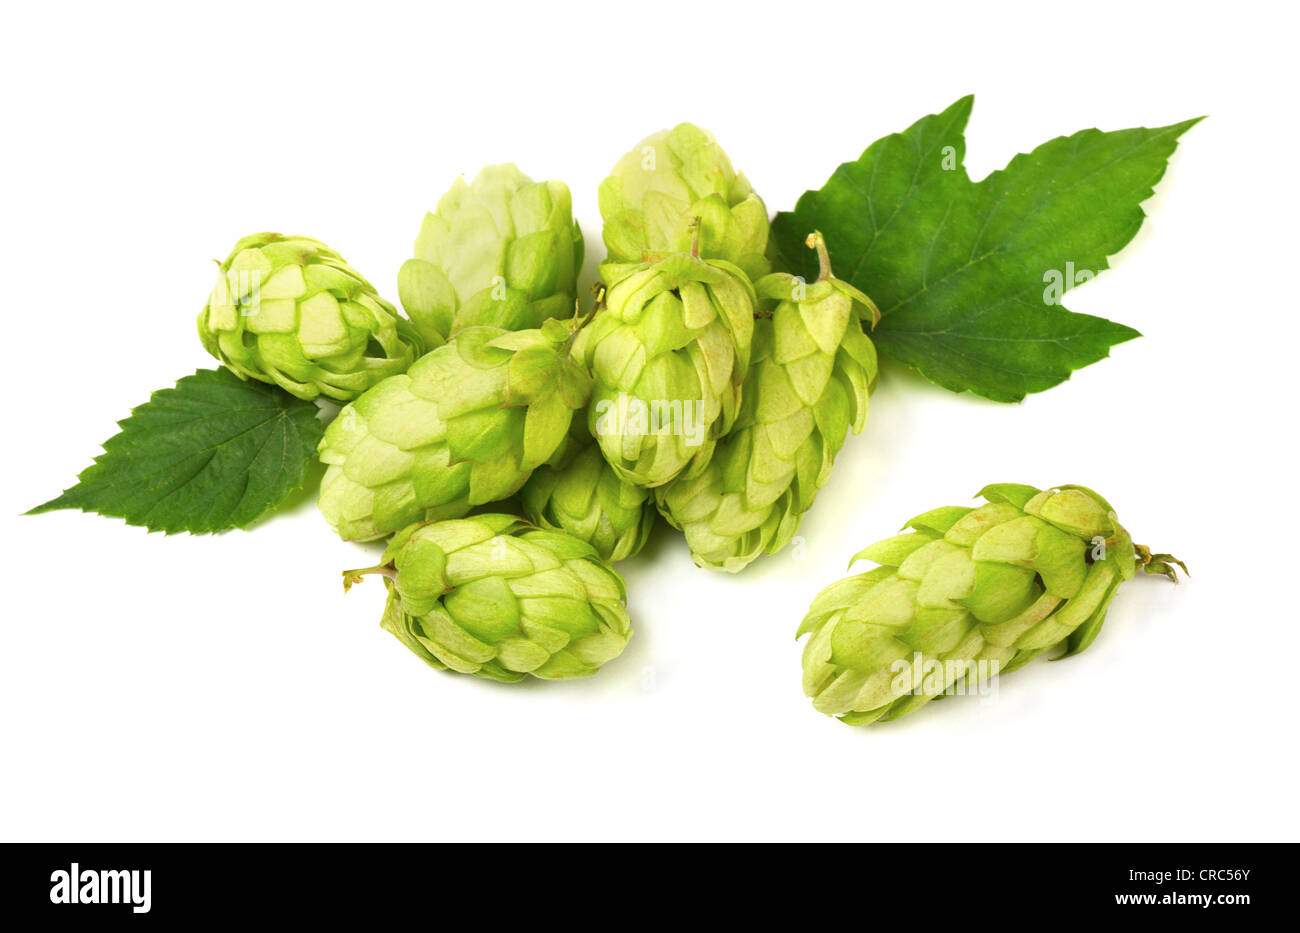 Pile of green hop cones isolated on white Stock Photo